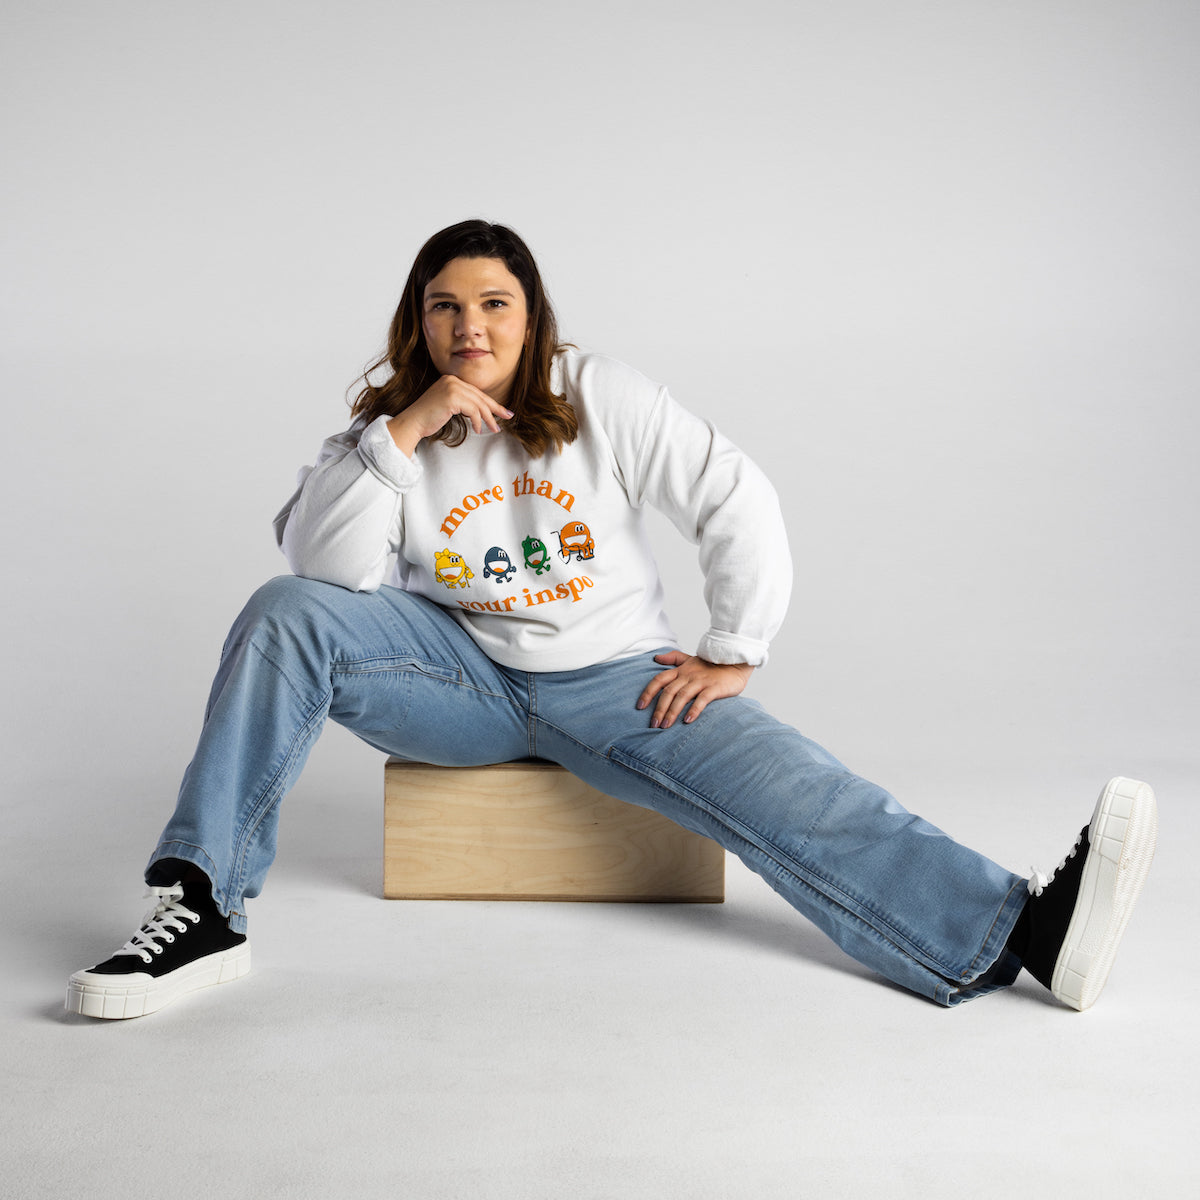 Erica is sitting on top of a tan box and is wearing light wash denim and a white long sleeve shirt with a graphic on it. She is also wearing black and white shoes.